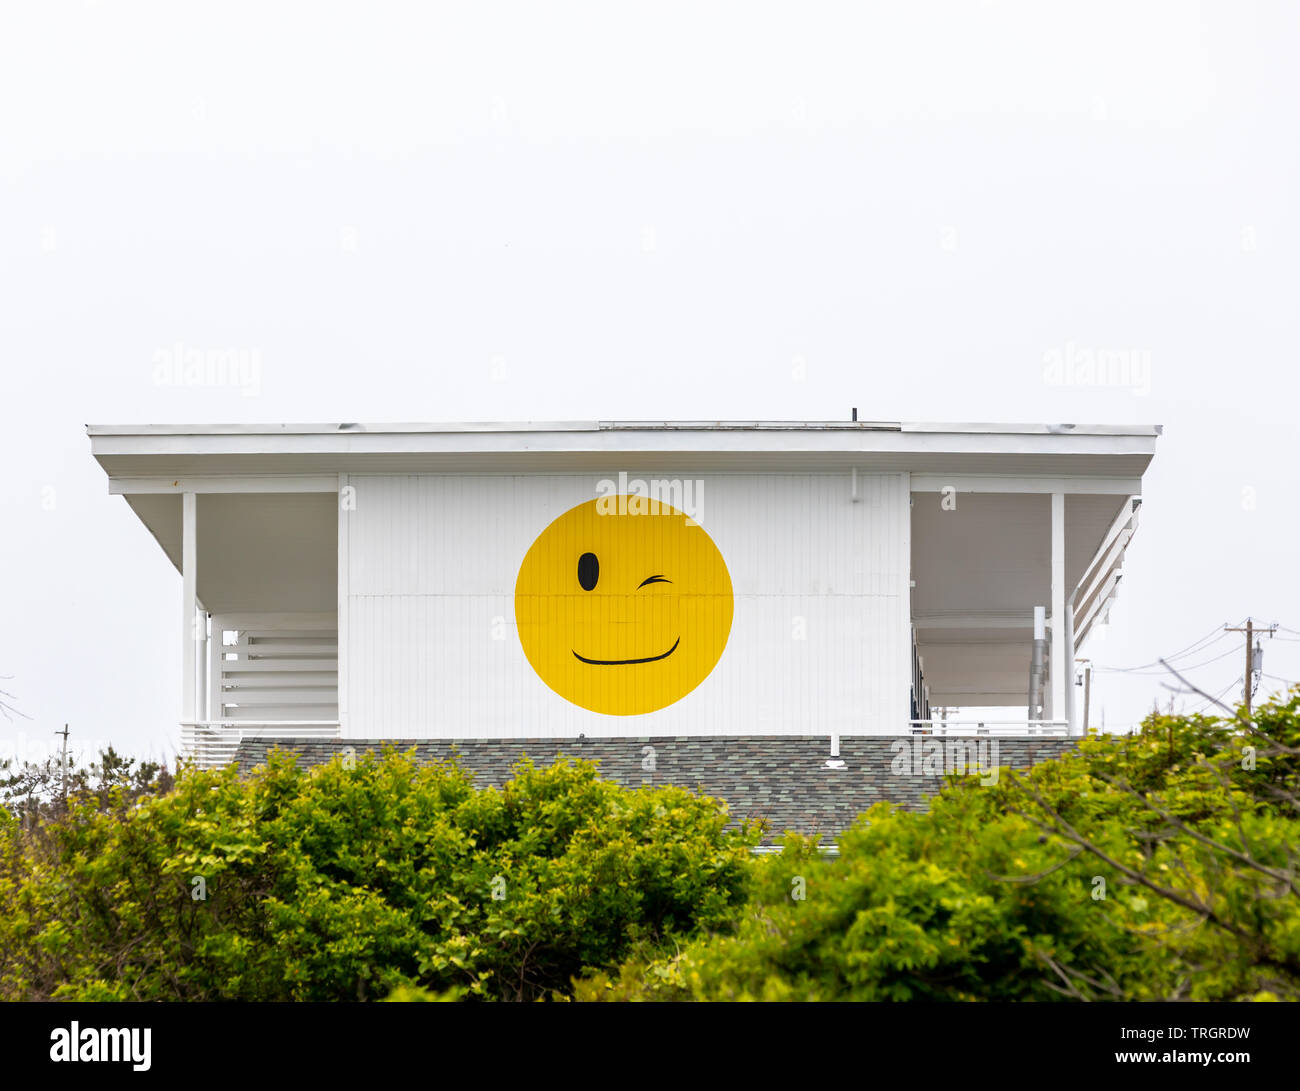 Large yellow smiley face with a winking eye on the side of a Montauk Hotel, NY Stock Photo